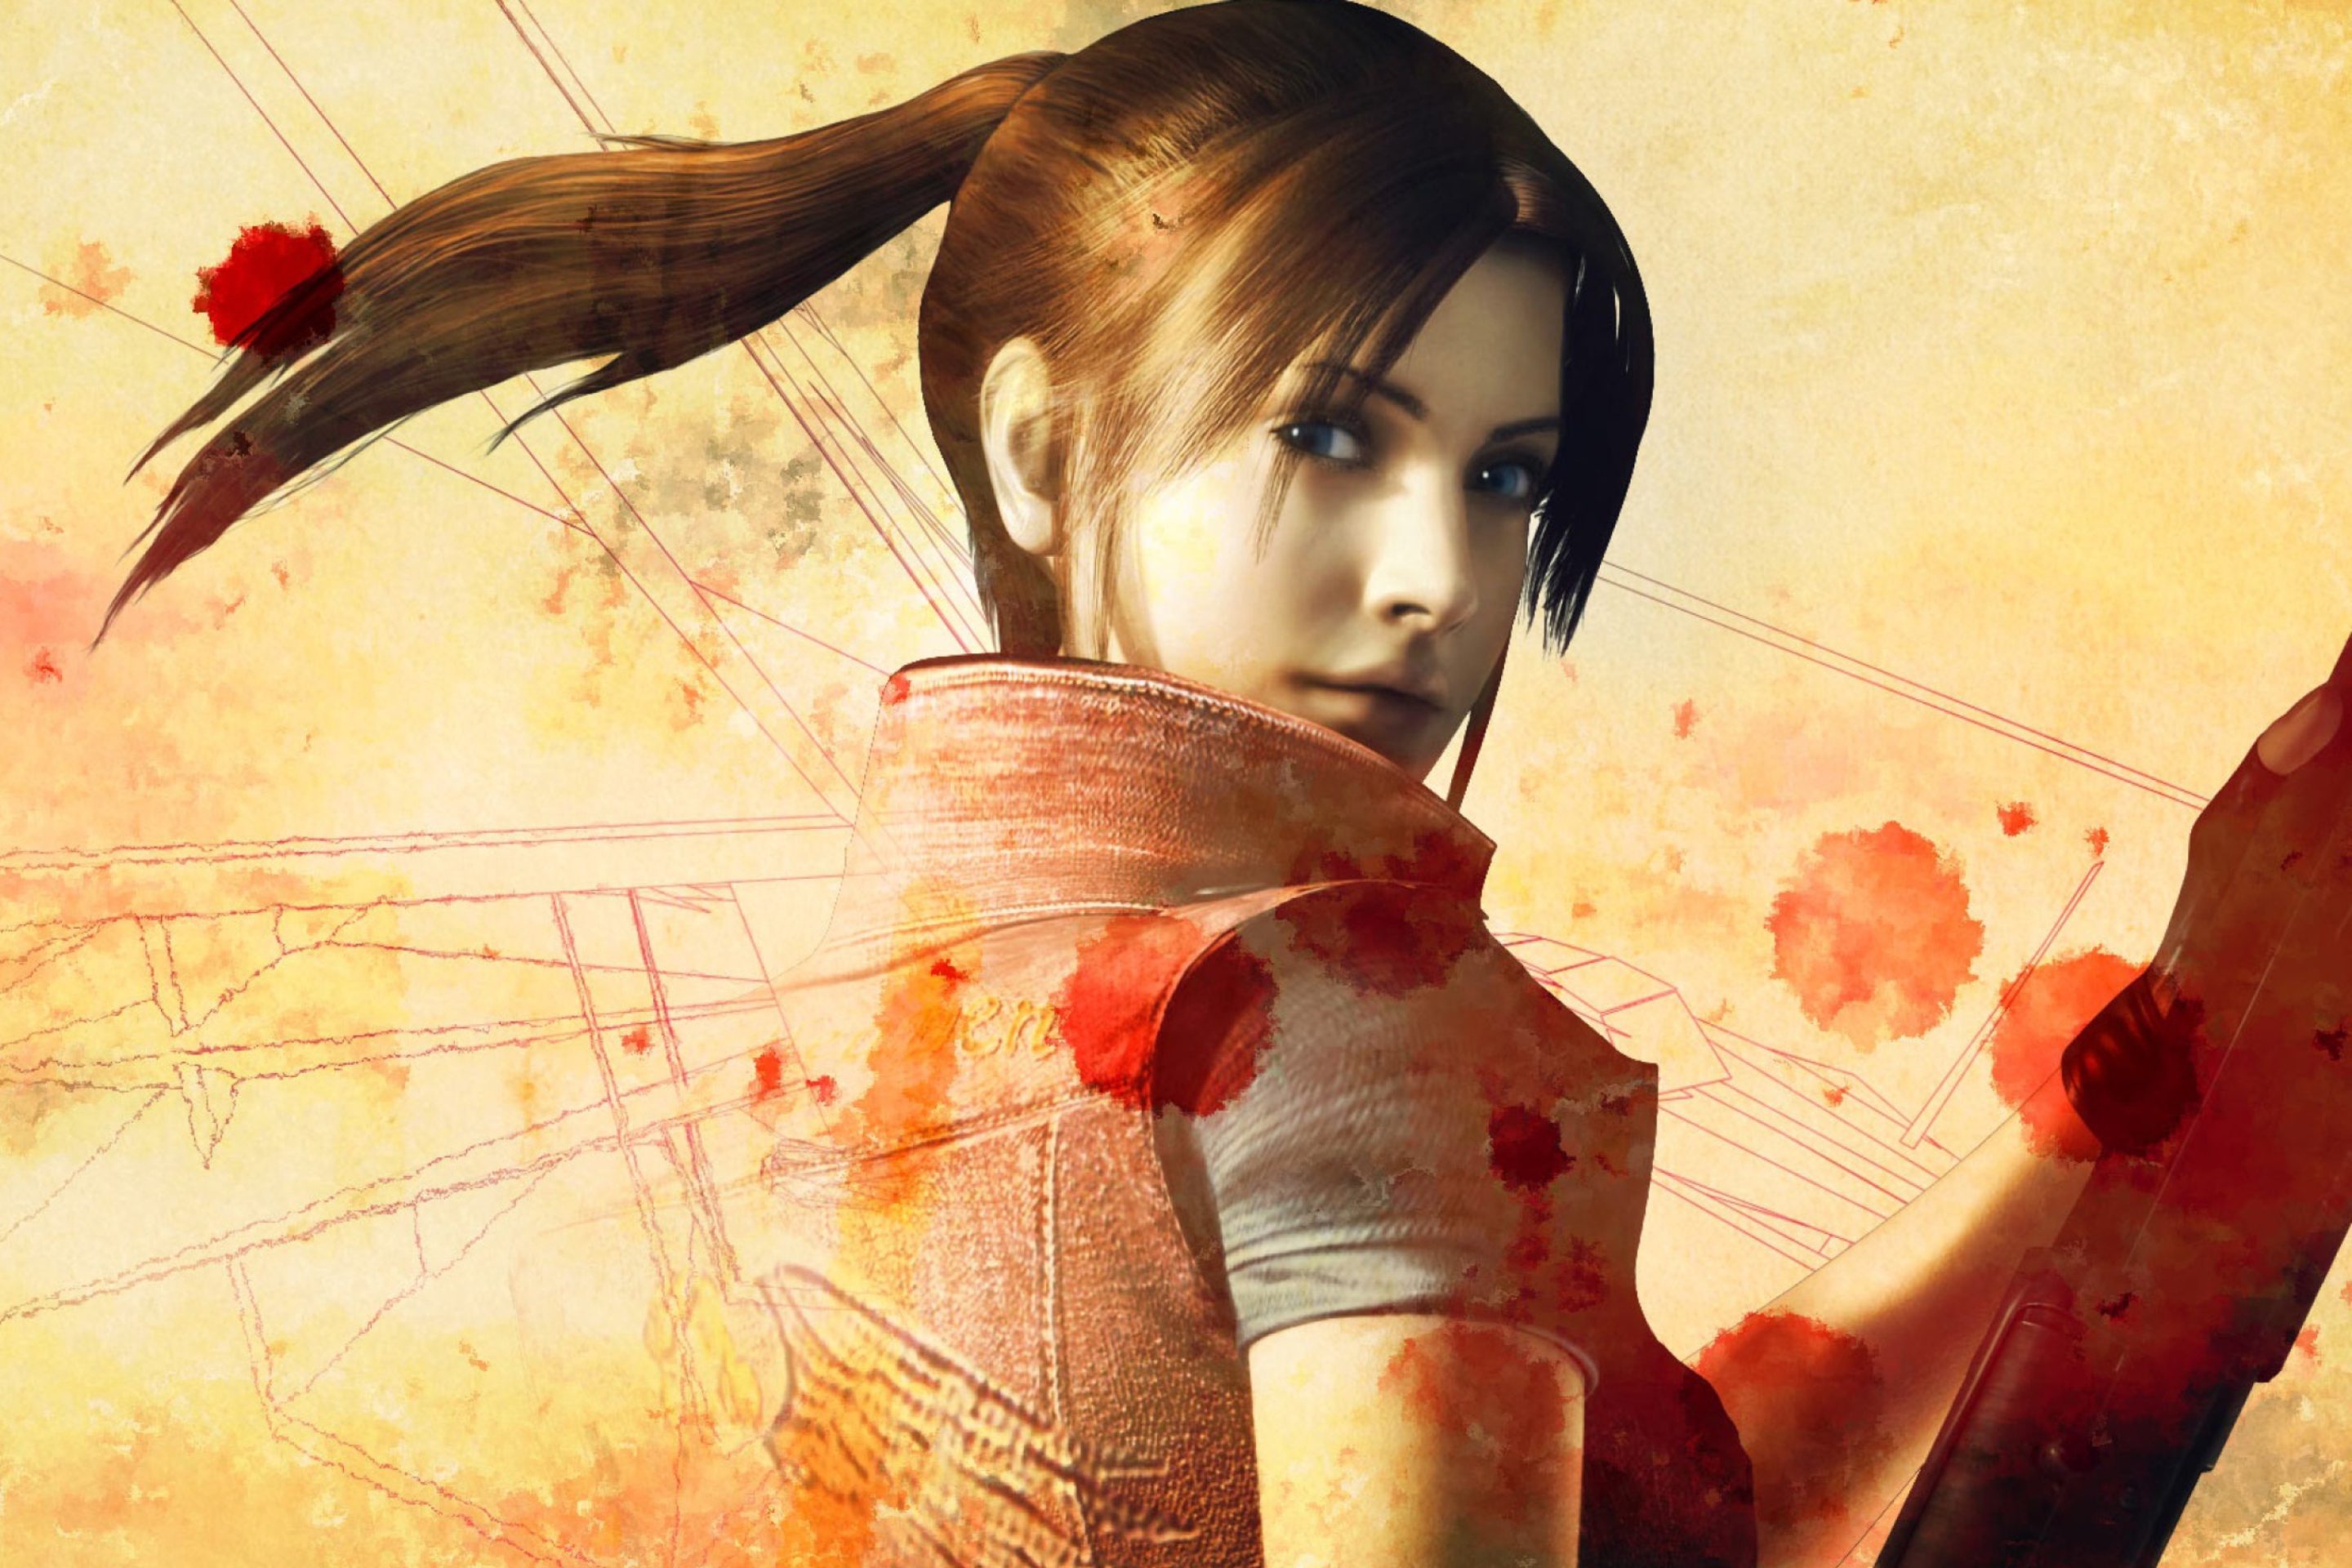 Resident Evil Claire Redfield wallpaper 2880x1920